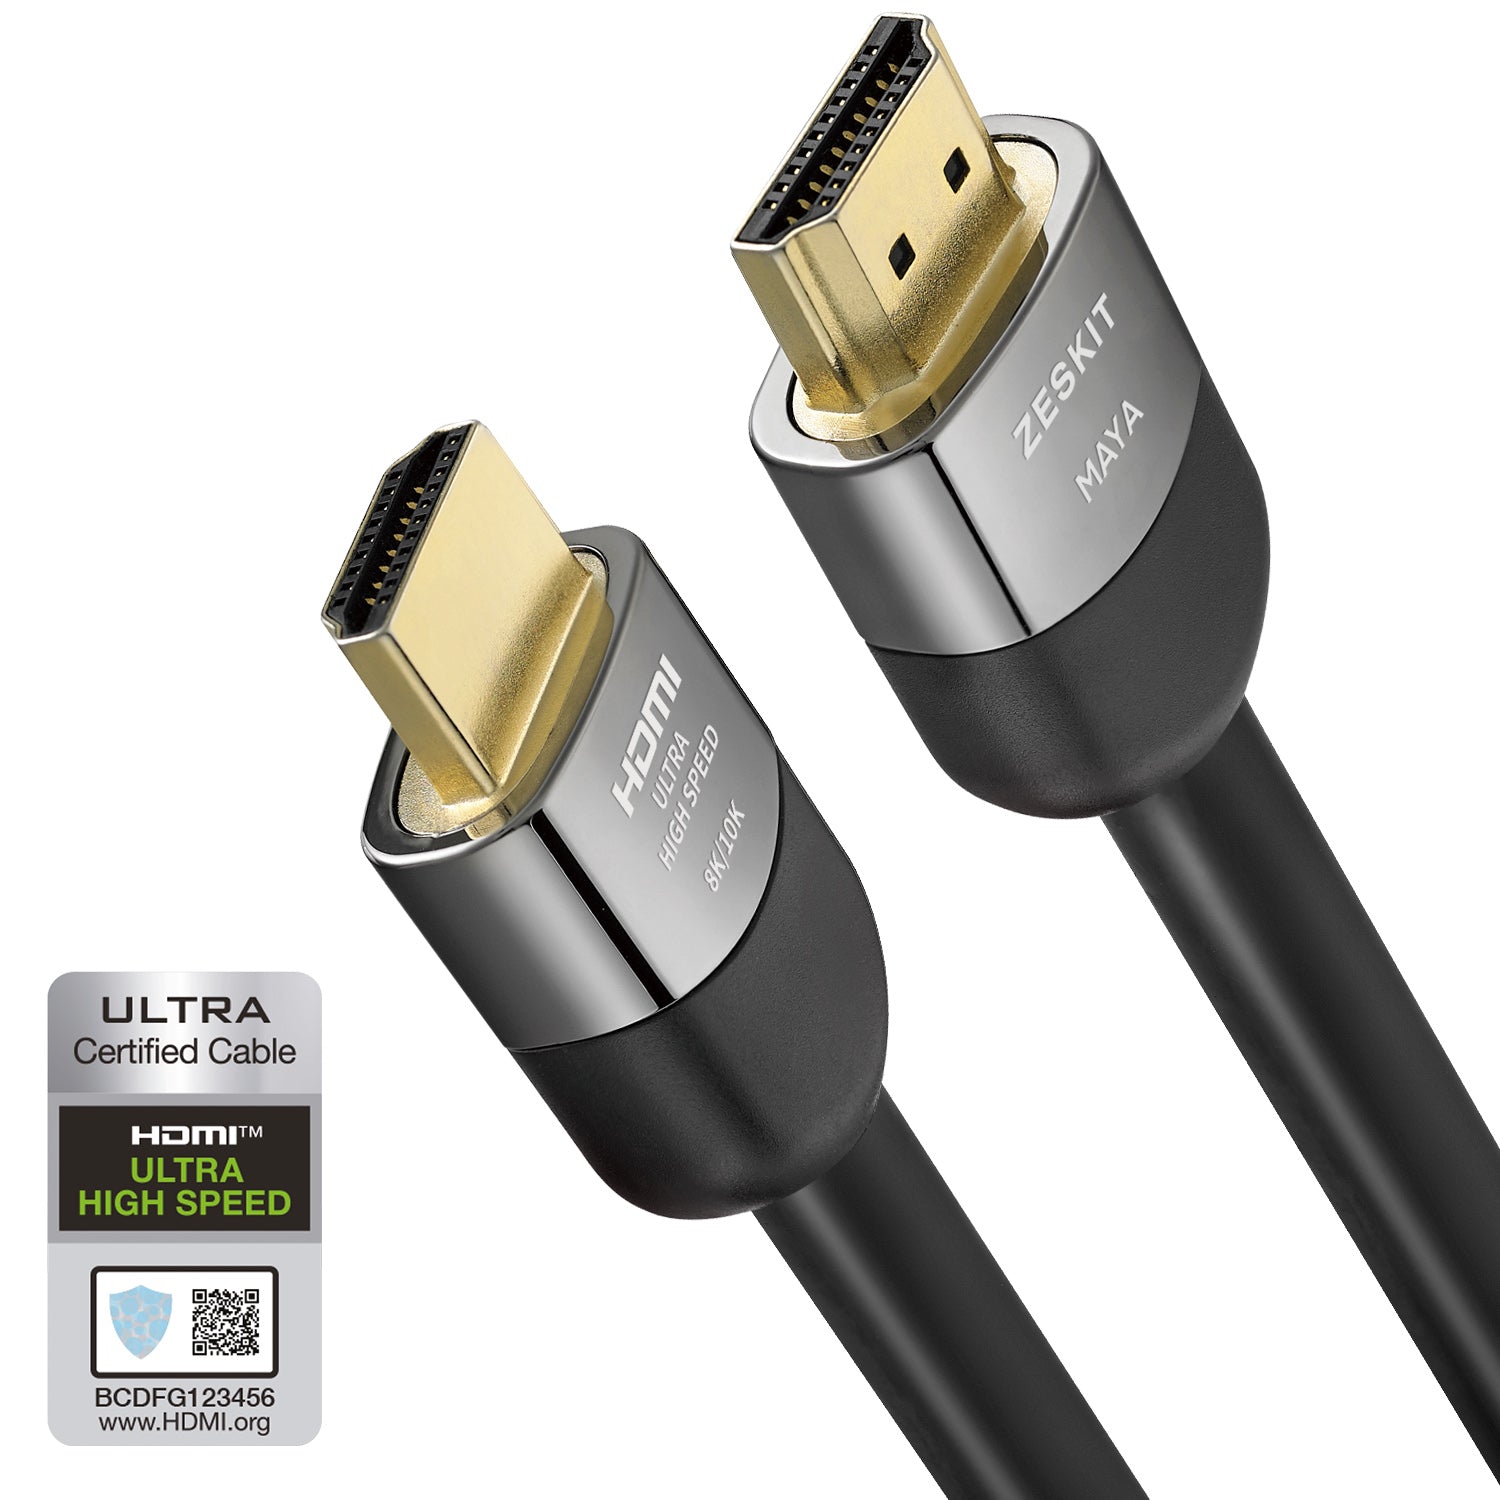 HIGH-SPEED HDMI CABLE 4K ENHANCED AUDIO And VIDEO